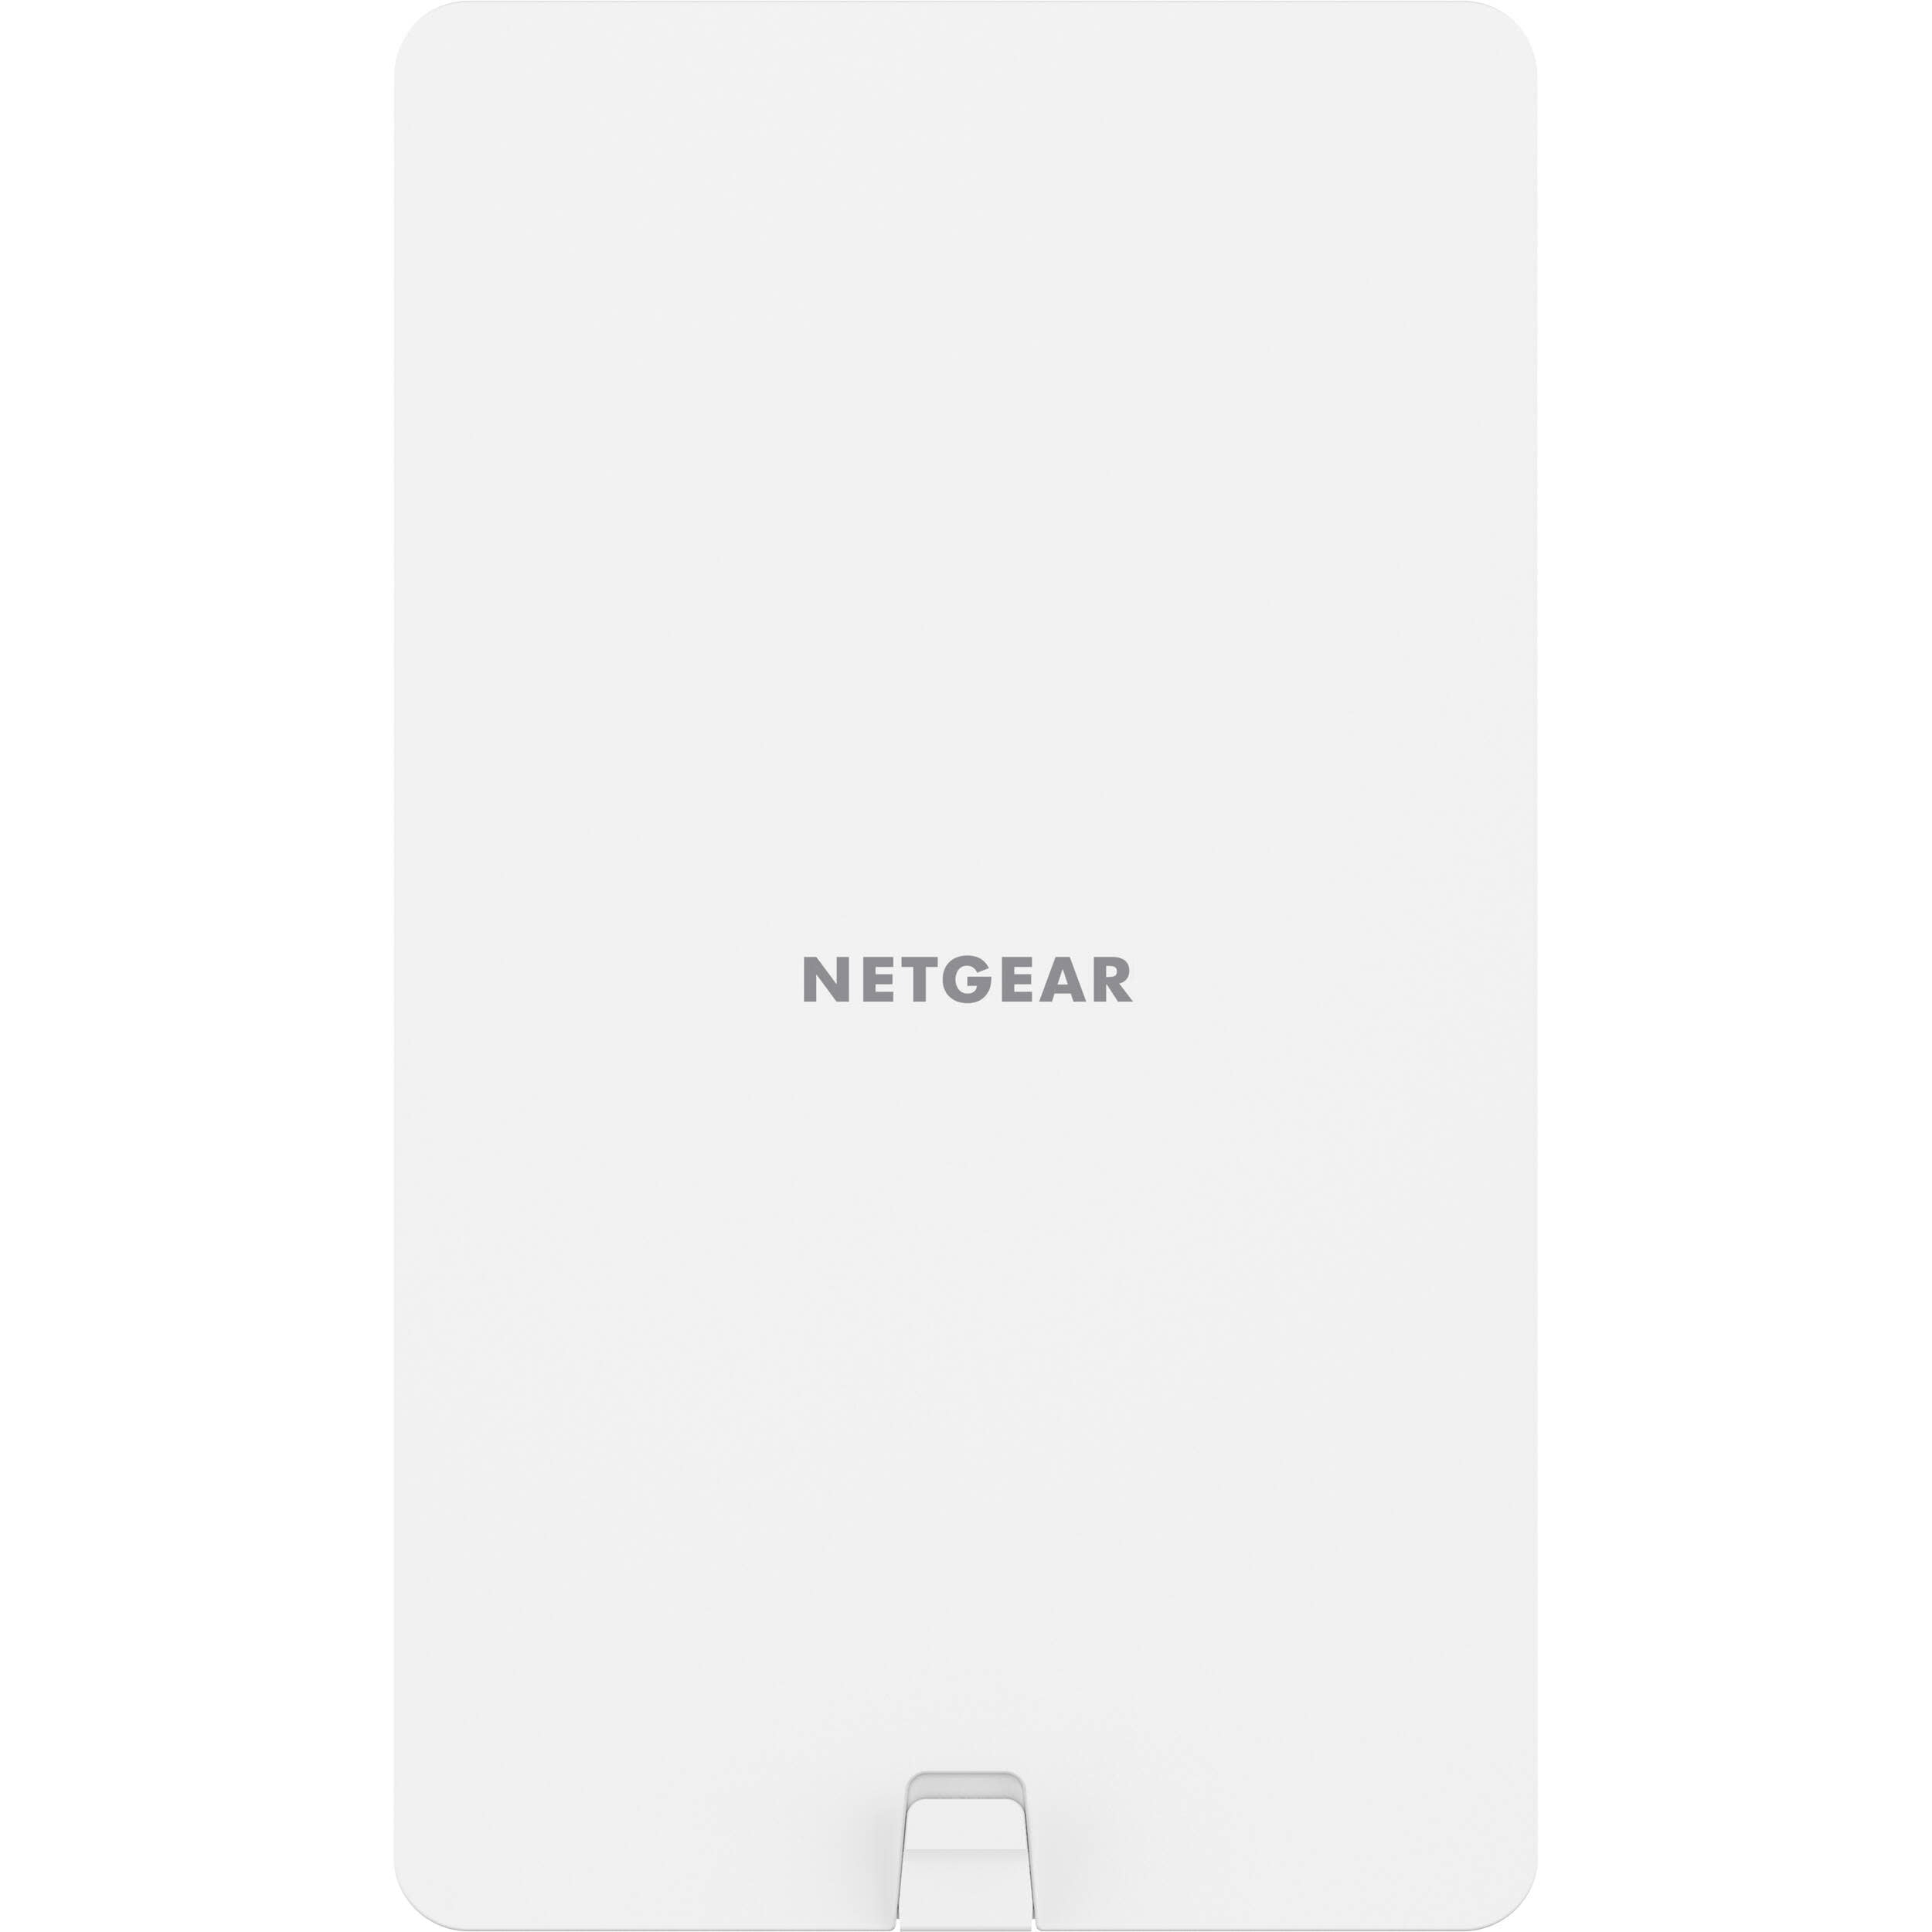 NETGEAR AX1800 Band White 6 PoE Dual Insight Point, Managed Multi-Gig WiFi Access Outdoor